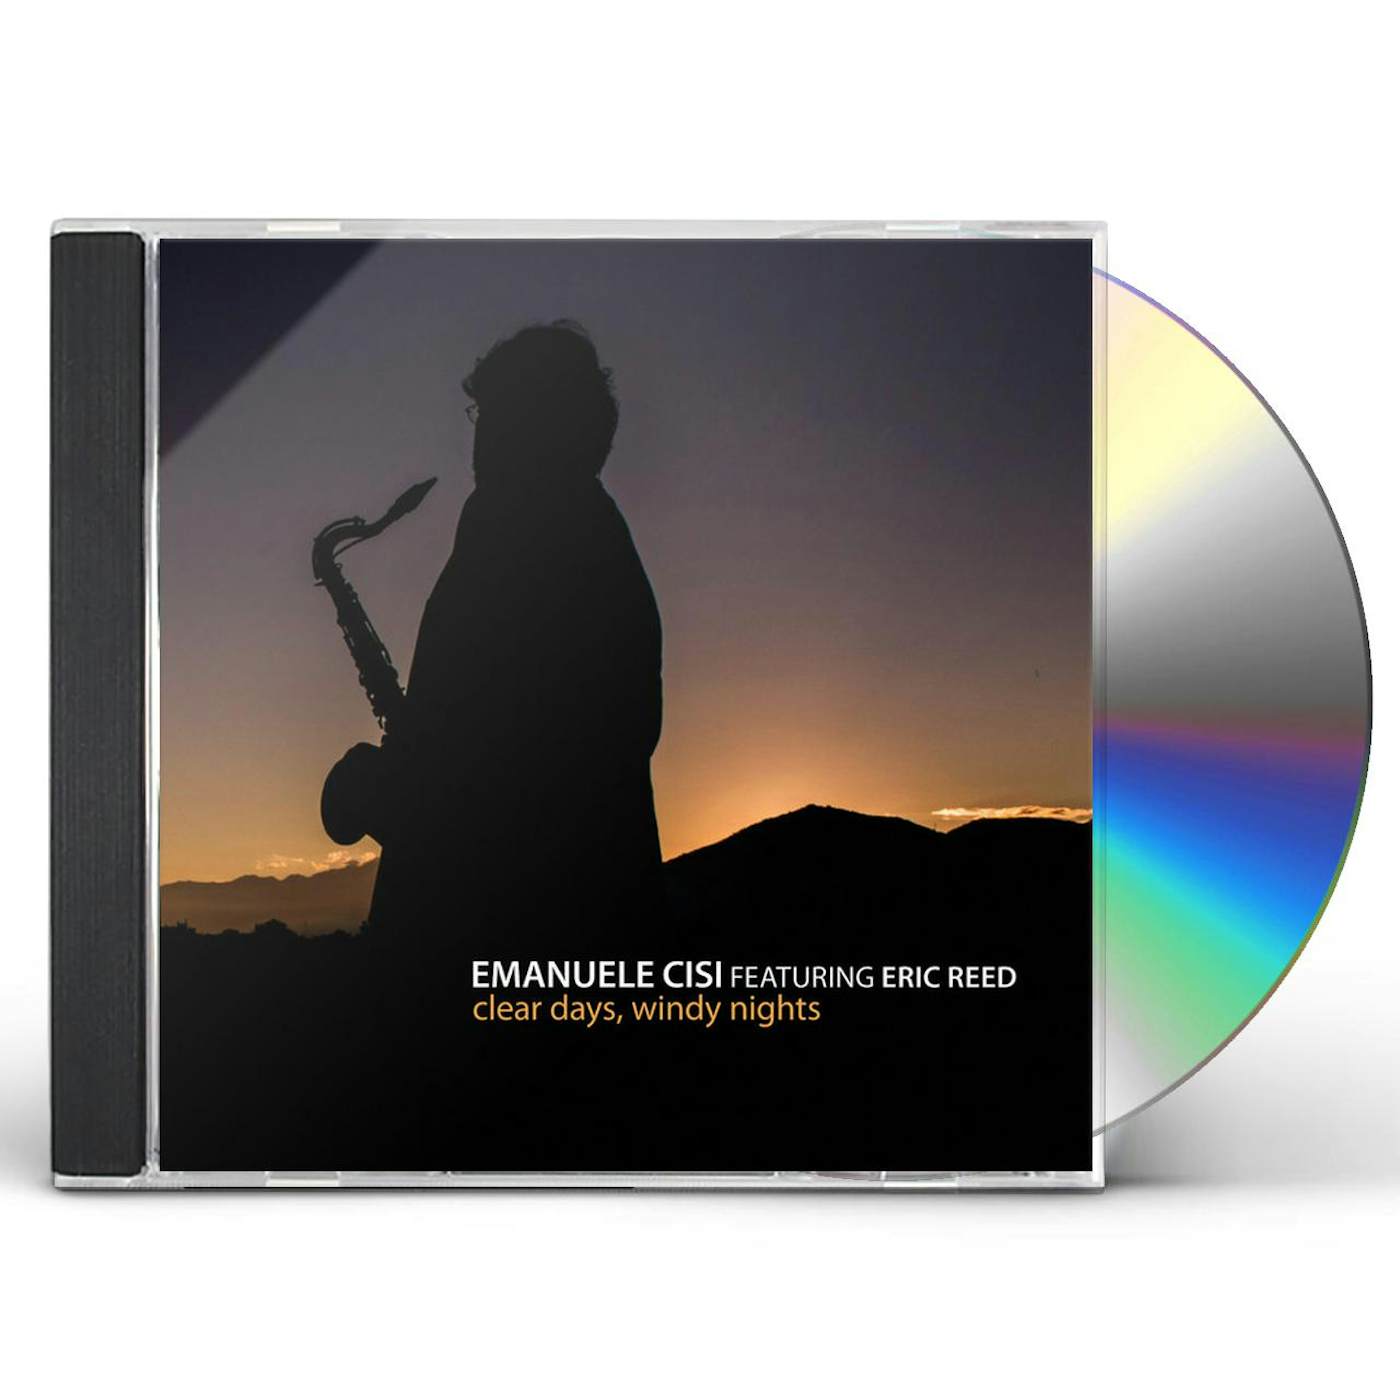 Emanuele Cisi CLEAR DAYS WINDY NIGHTS CD